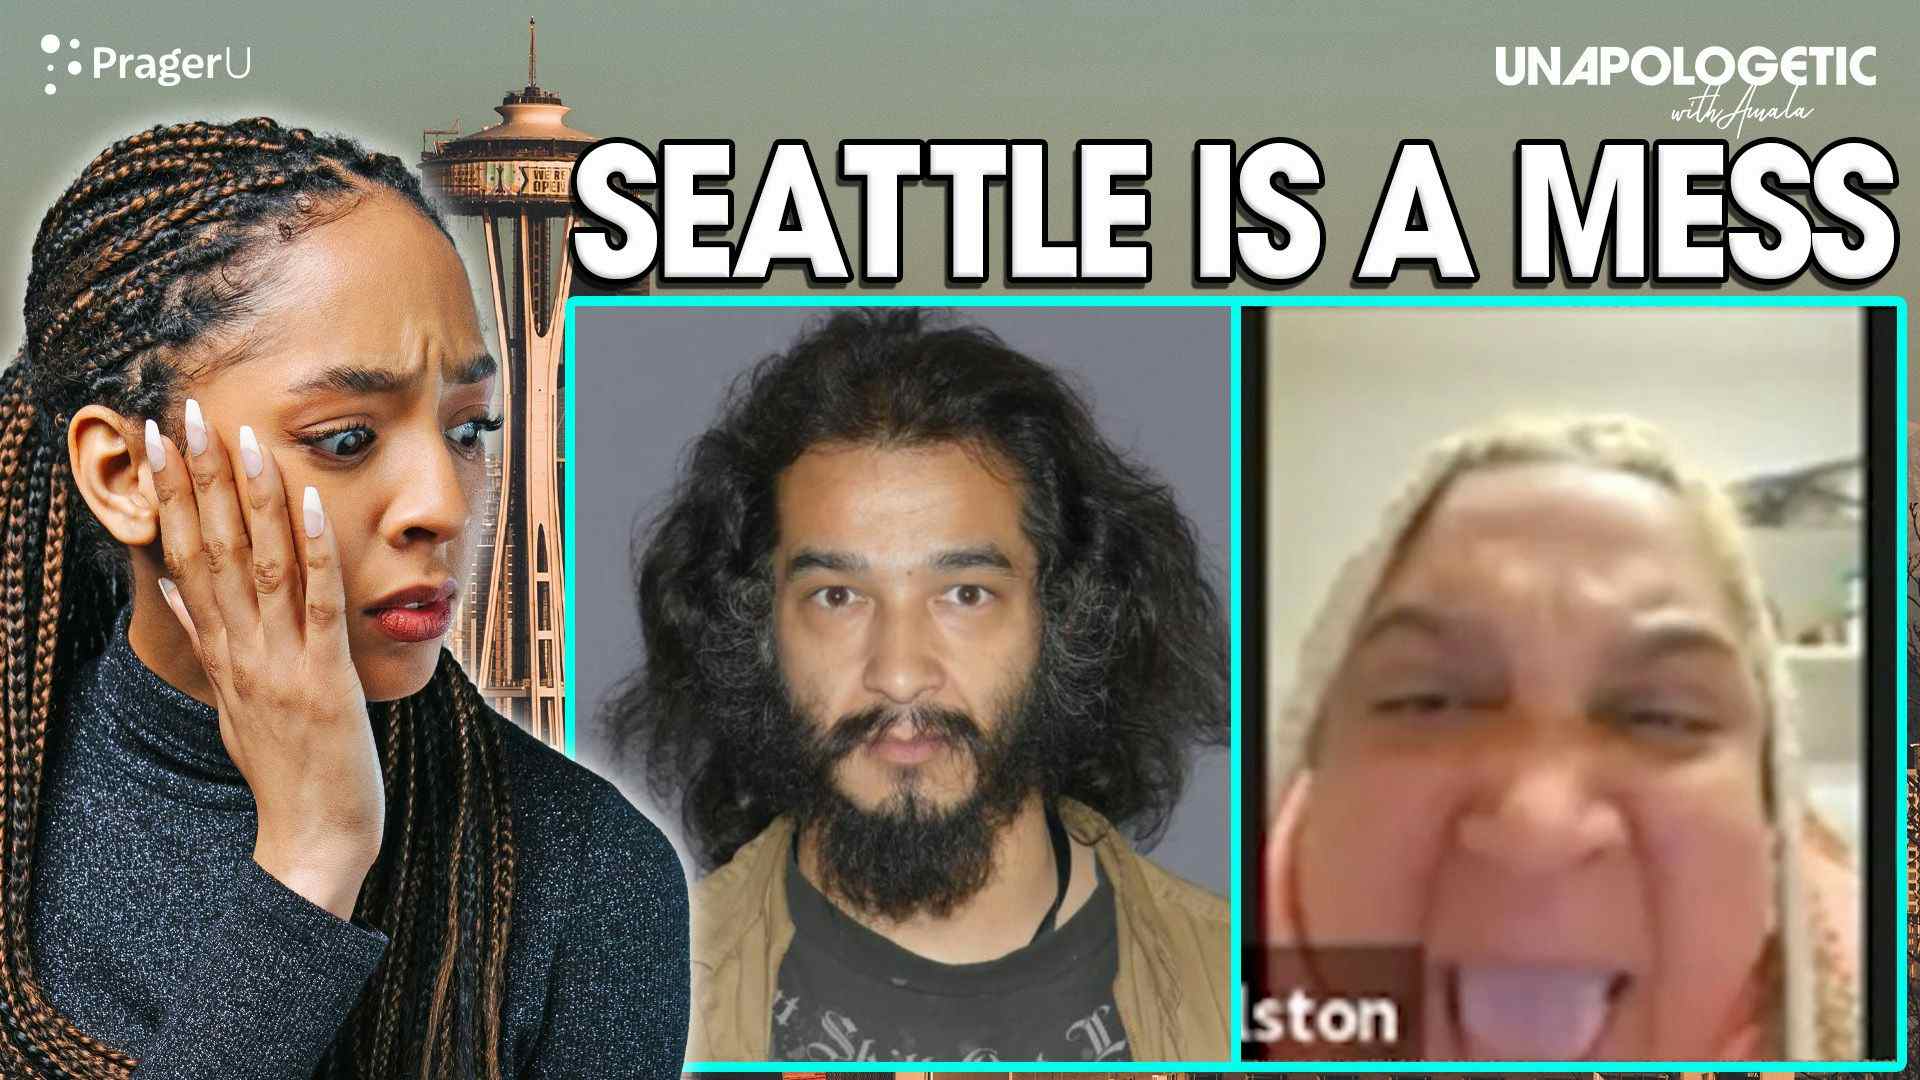 Sex Offender Appointed to Seattle Taskforce?